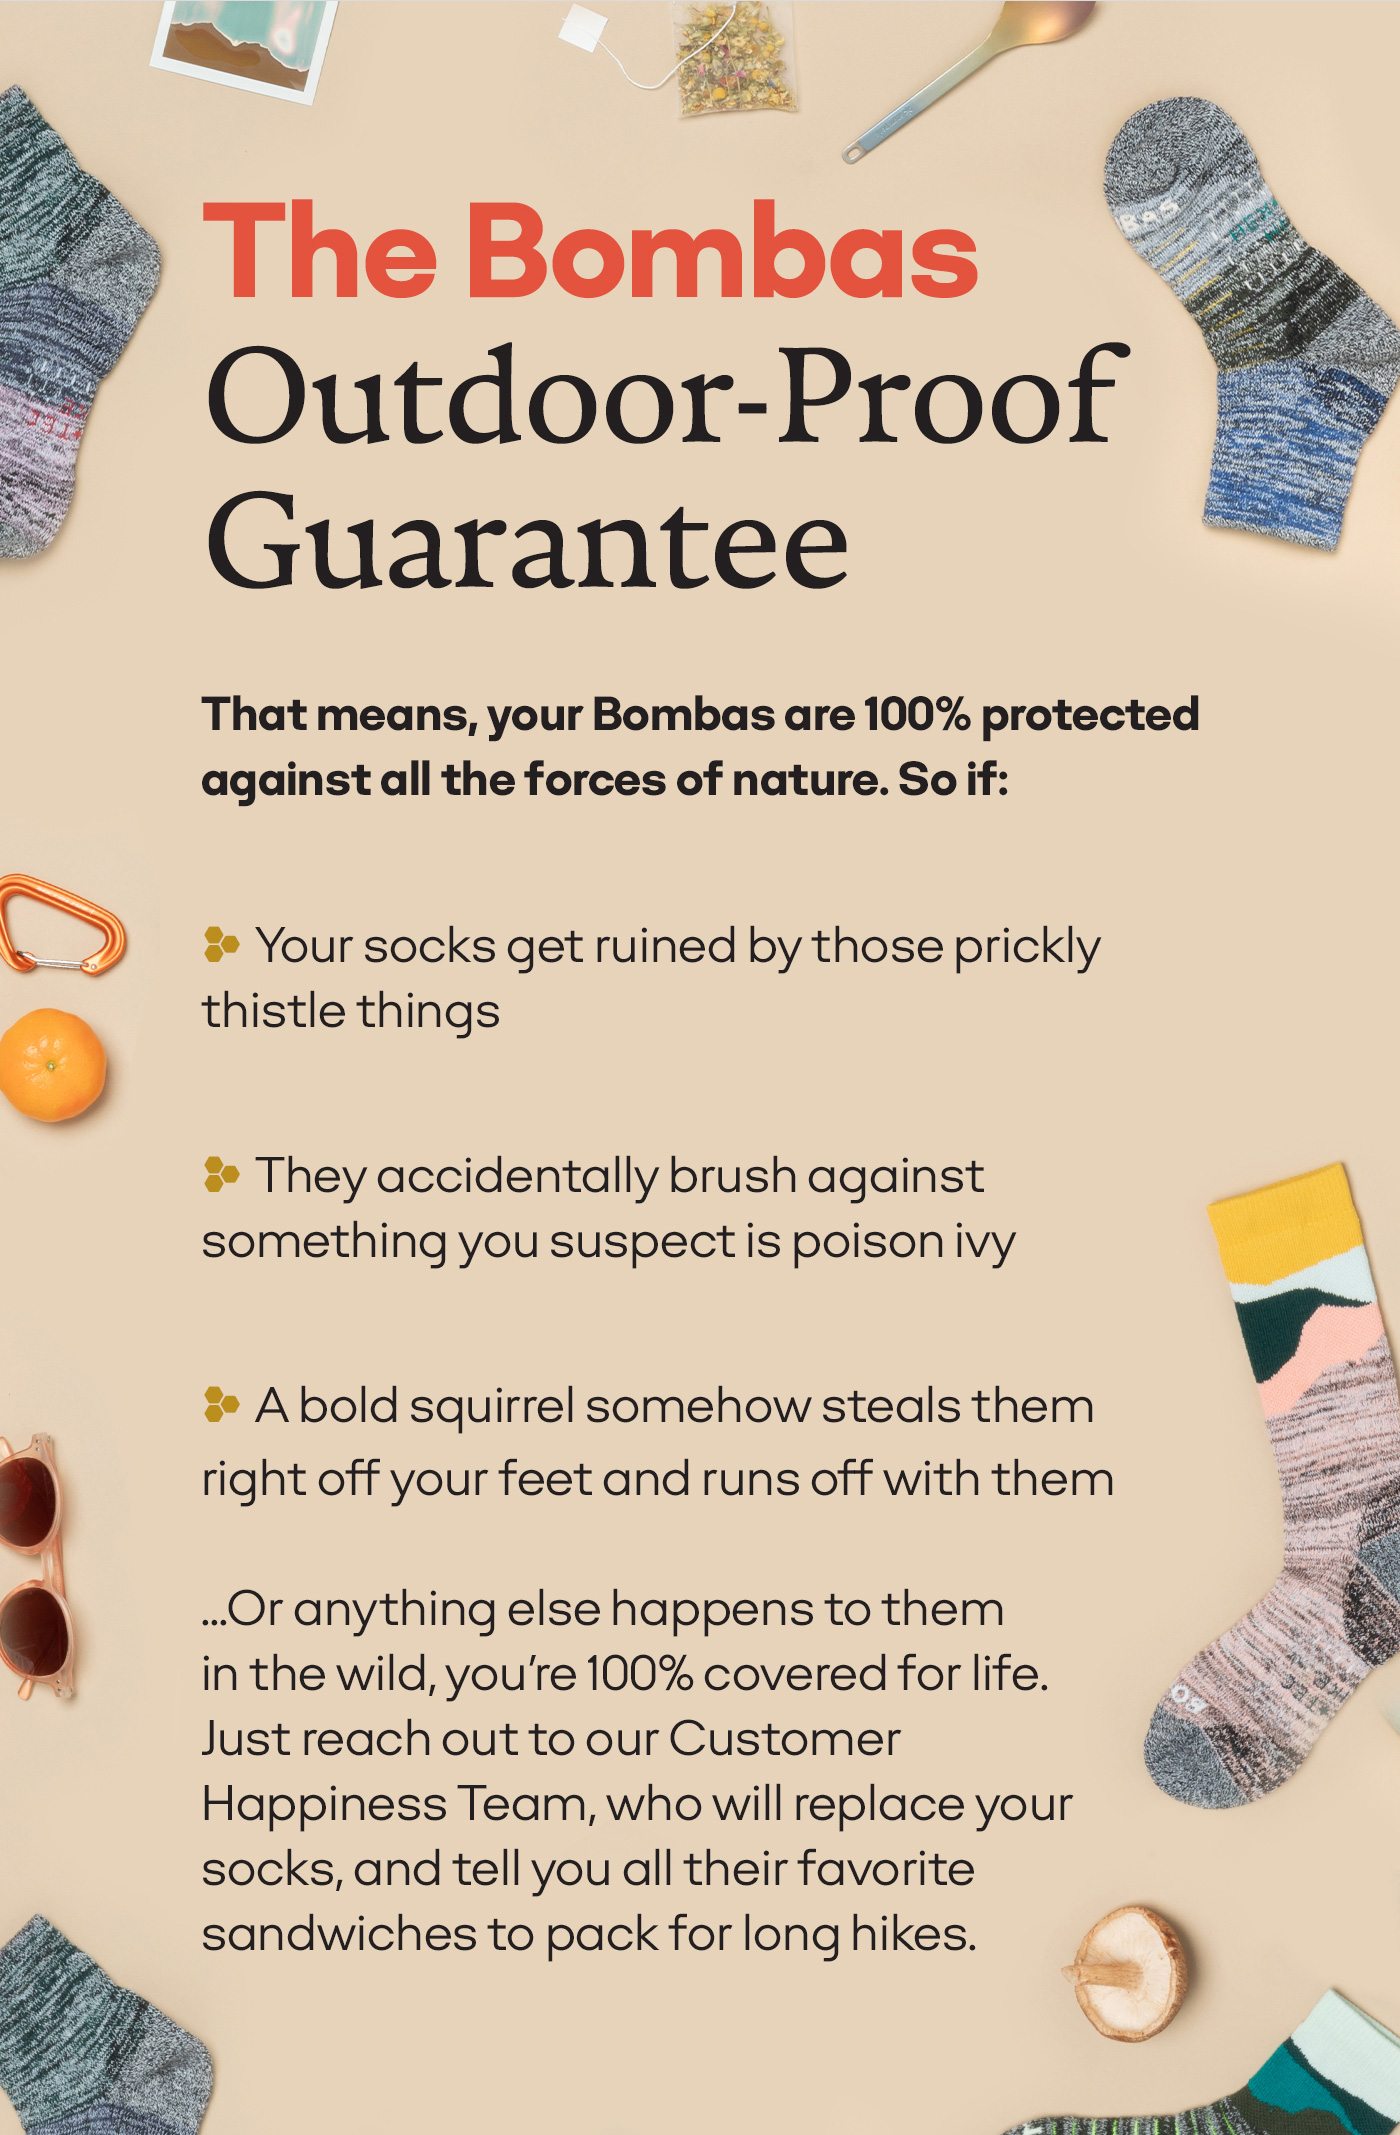 The Bombas Outdoor-Proof Guarantee | That means, your Bombas are 100% protected against all the forces of nature. So if: Your socks get ruined by those prickly thistle things | They accidentally brush against something you suspect is poison ivy | A bold squirrel somehow steals them right off your feet and runs off with them | ...Or anything else happens to them in the wild, you're 100% covered for life. Just reach out to our Customer Happiness Team, who will replace your socks, and tell you all their favorite sandwiches to pack for long hikes.